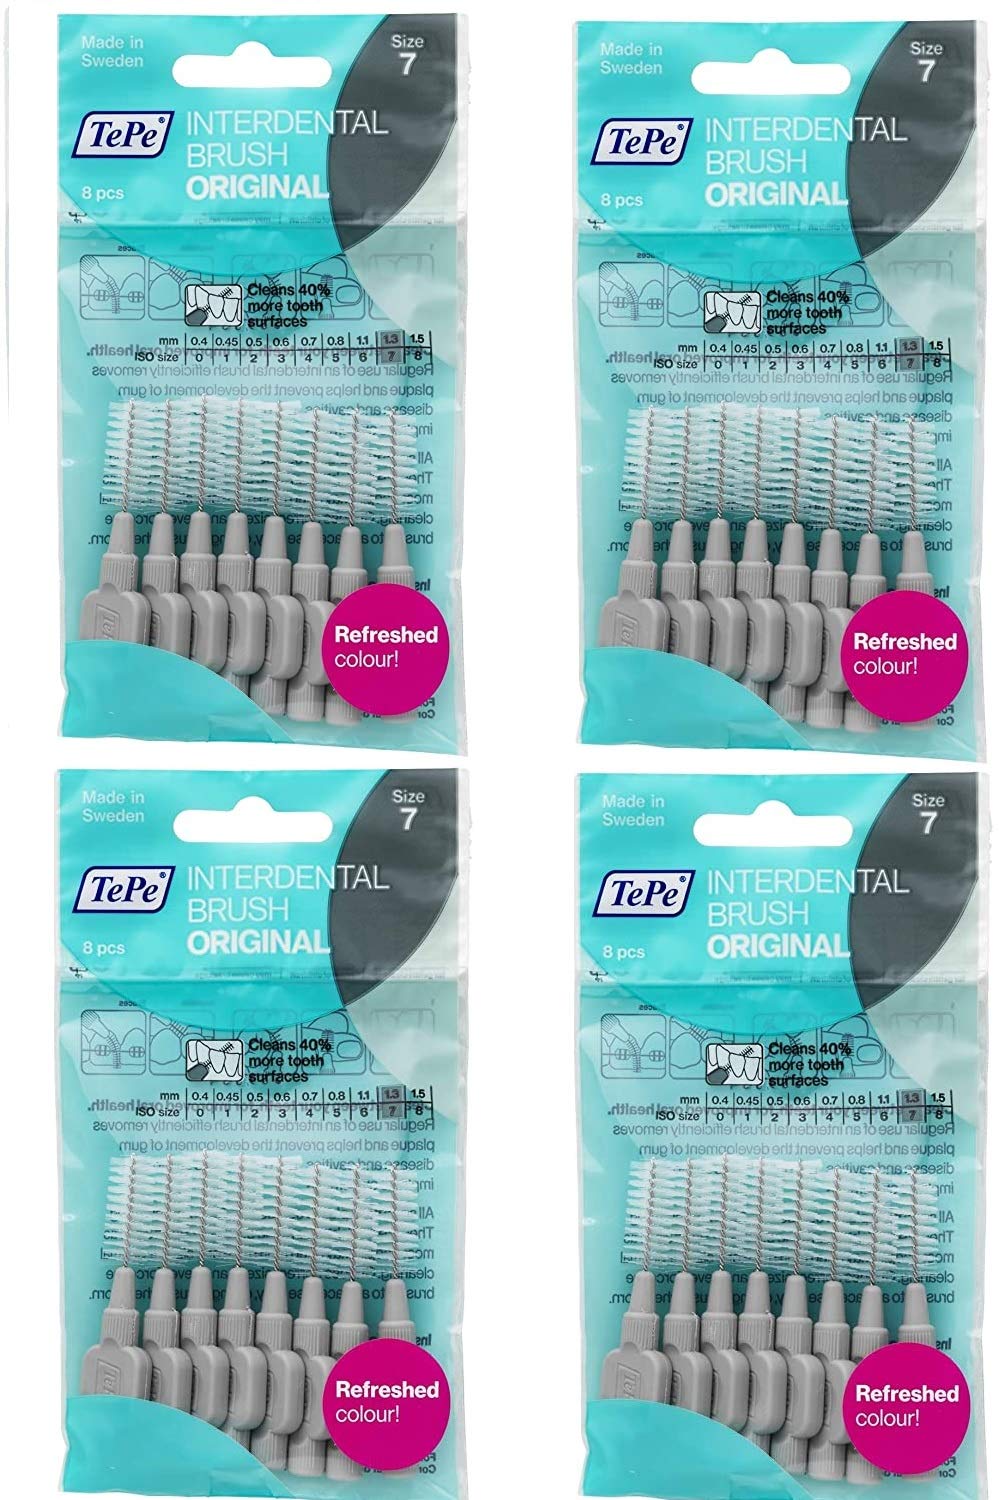 TePe Interdental Brushes 1.3mm Grey - 4 Packets of 8 (32 Brushes) by Tepe